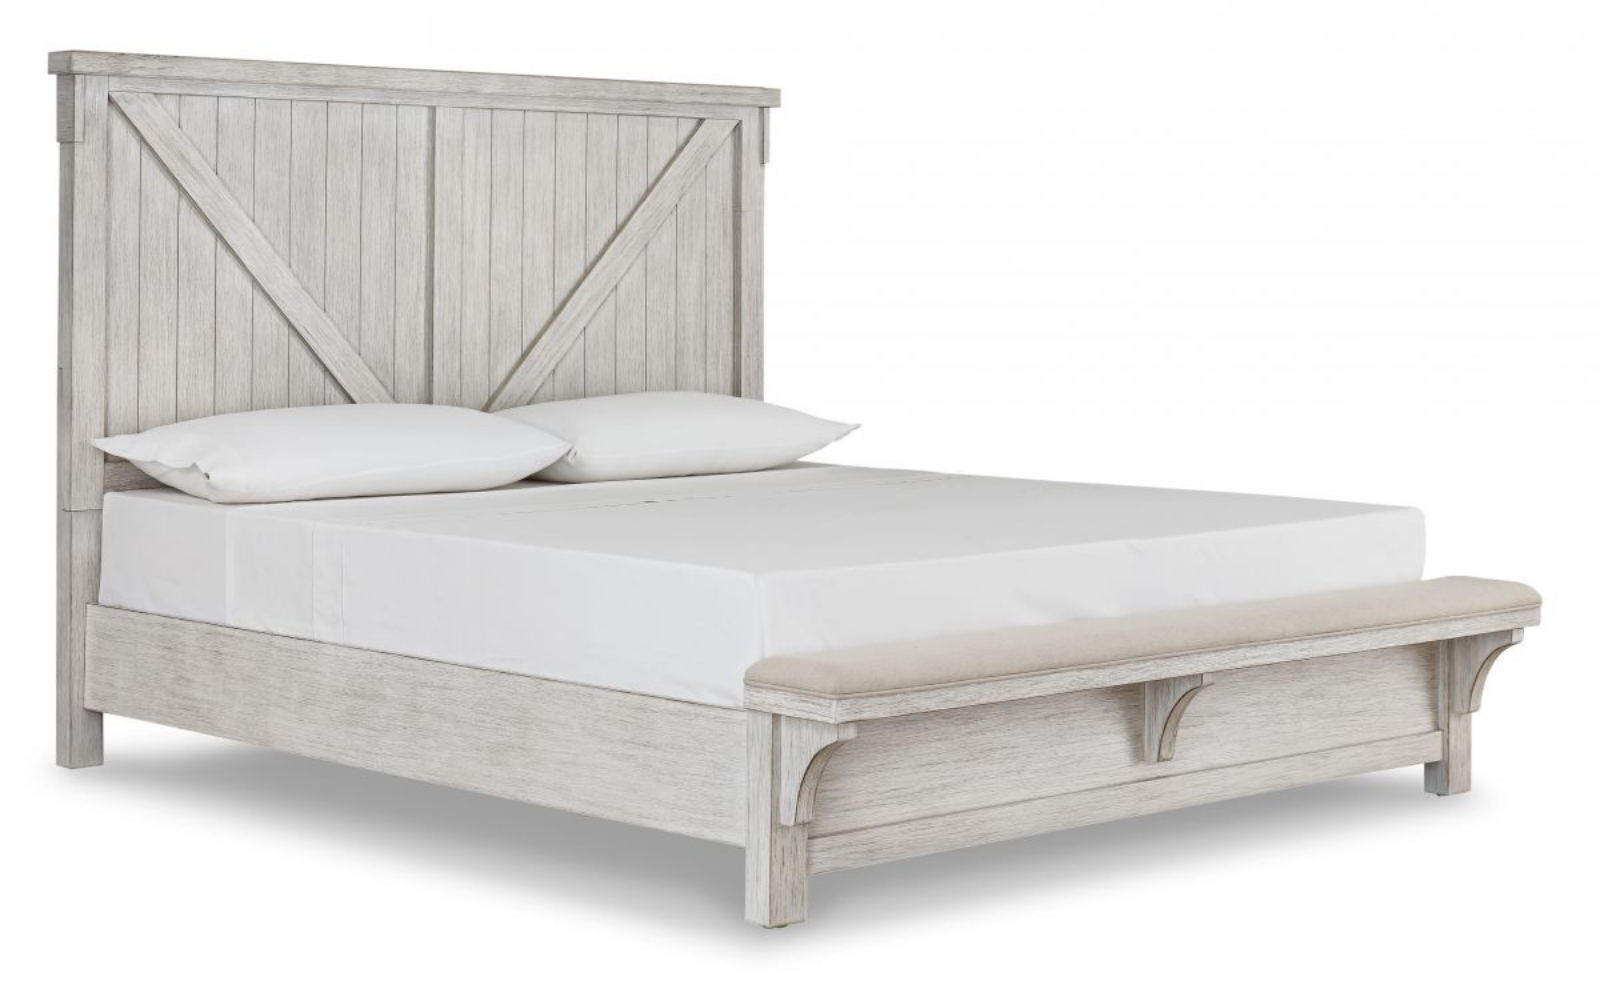 Picture of Brashland King Size Bed